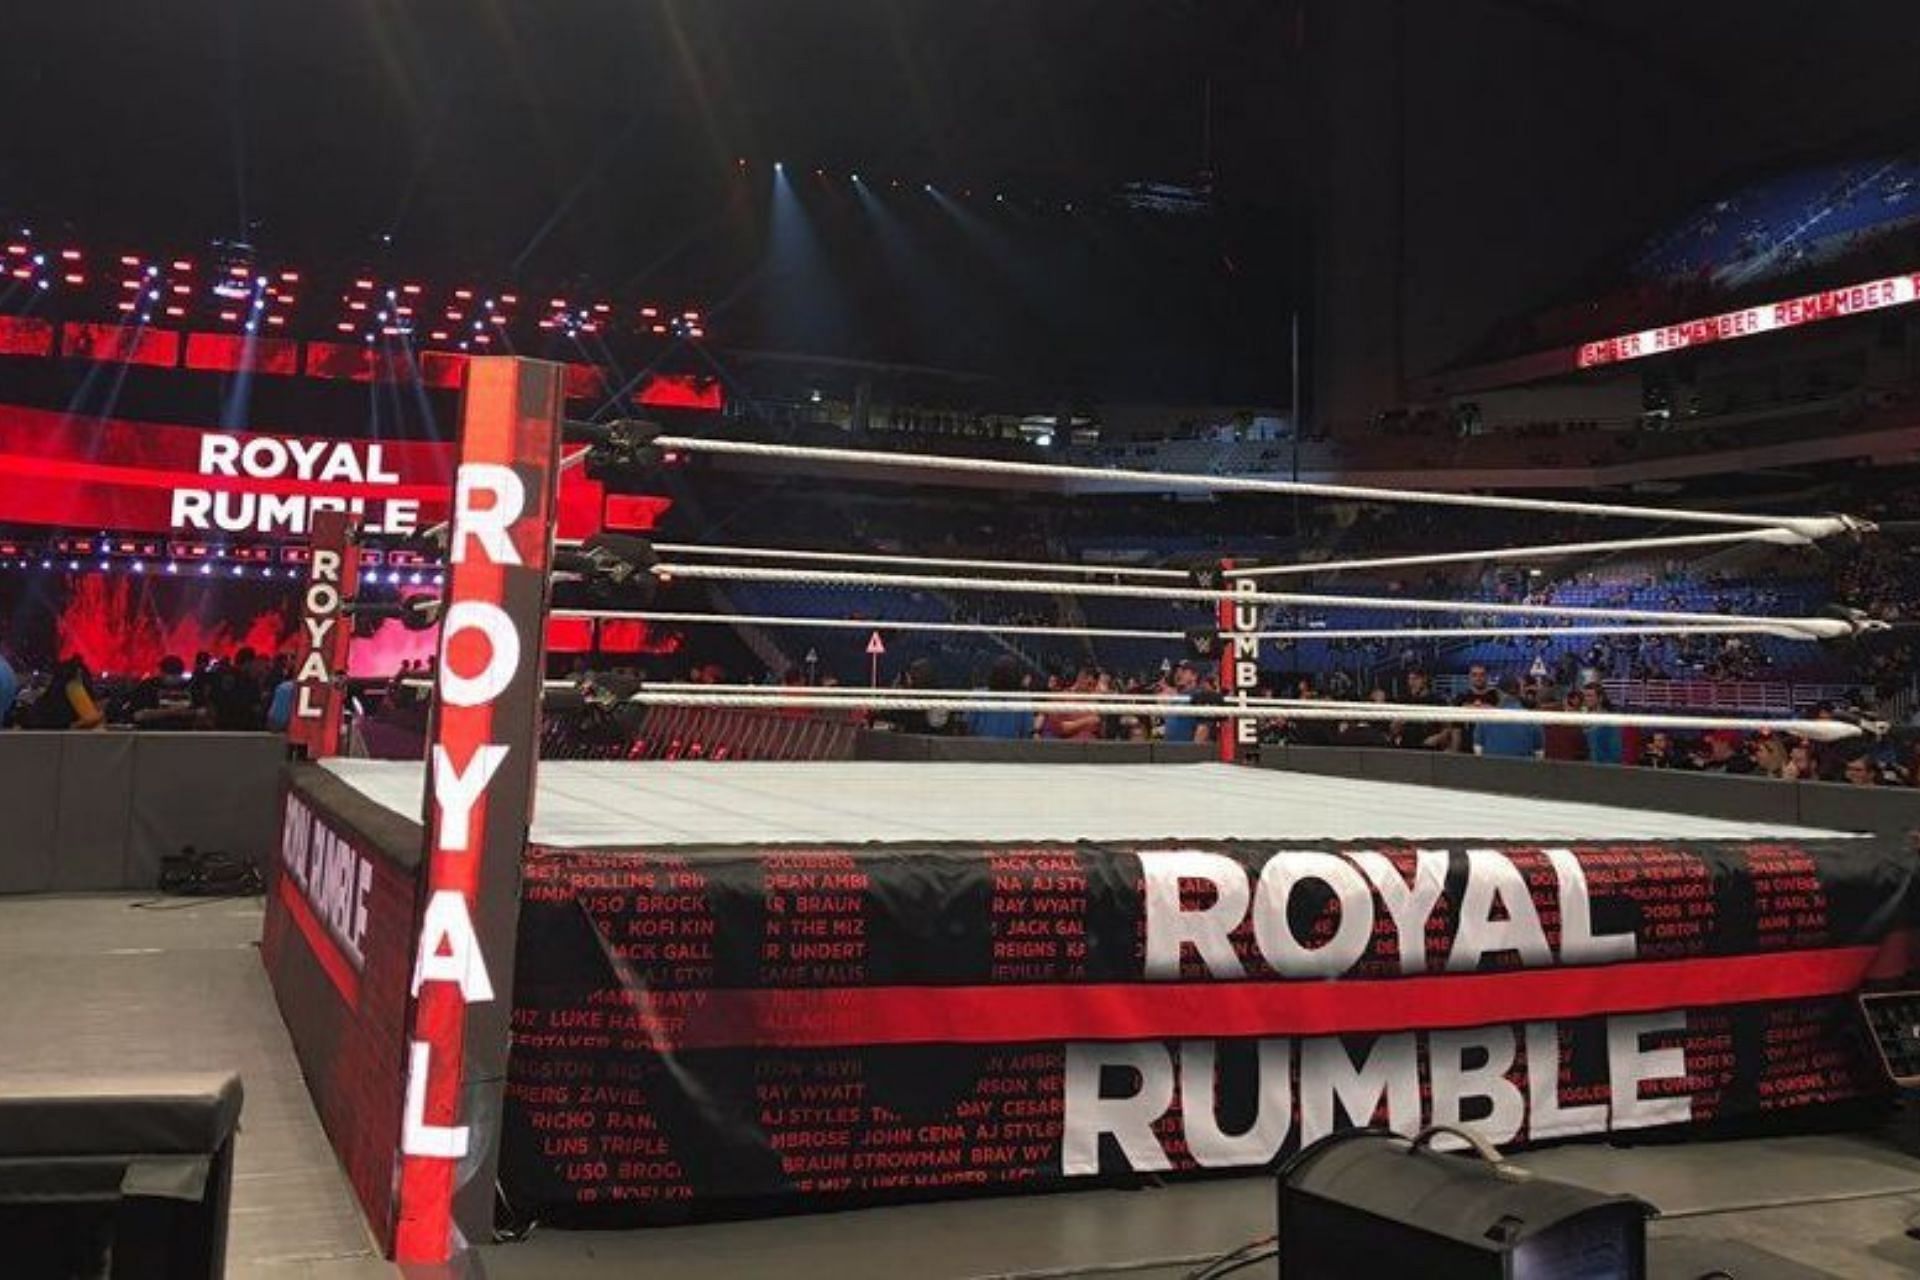 The Royal Rumble match is slated to happen in January